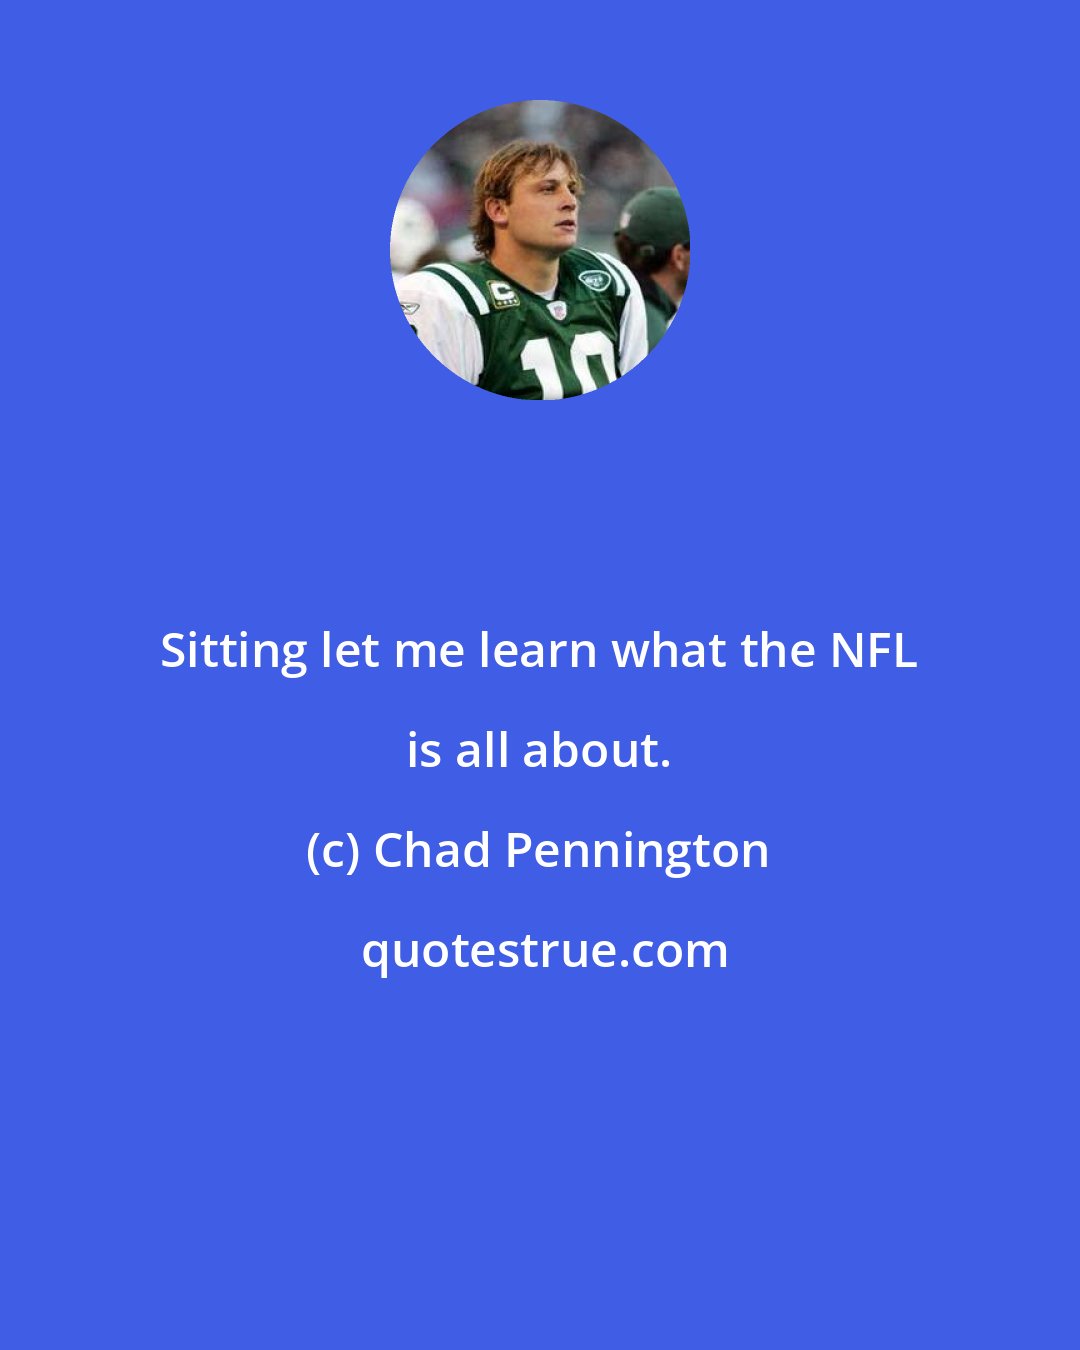 Chad Pennington: Sitting let me learn what the NFL is all about.